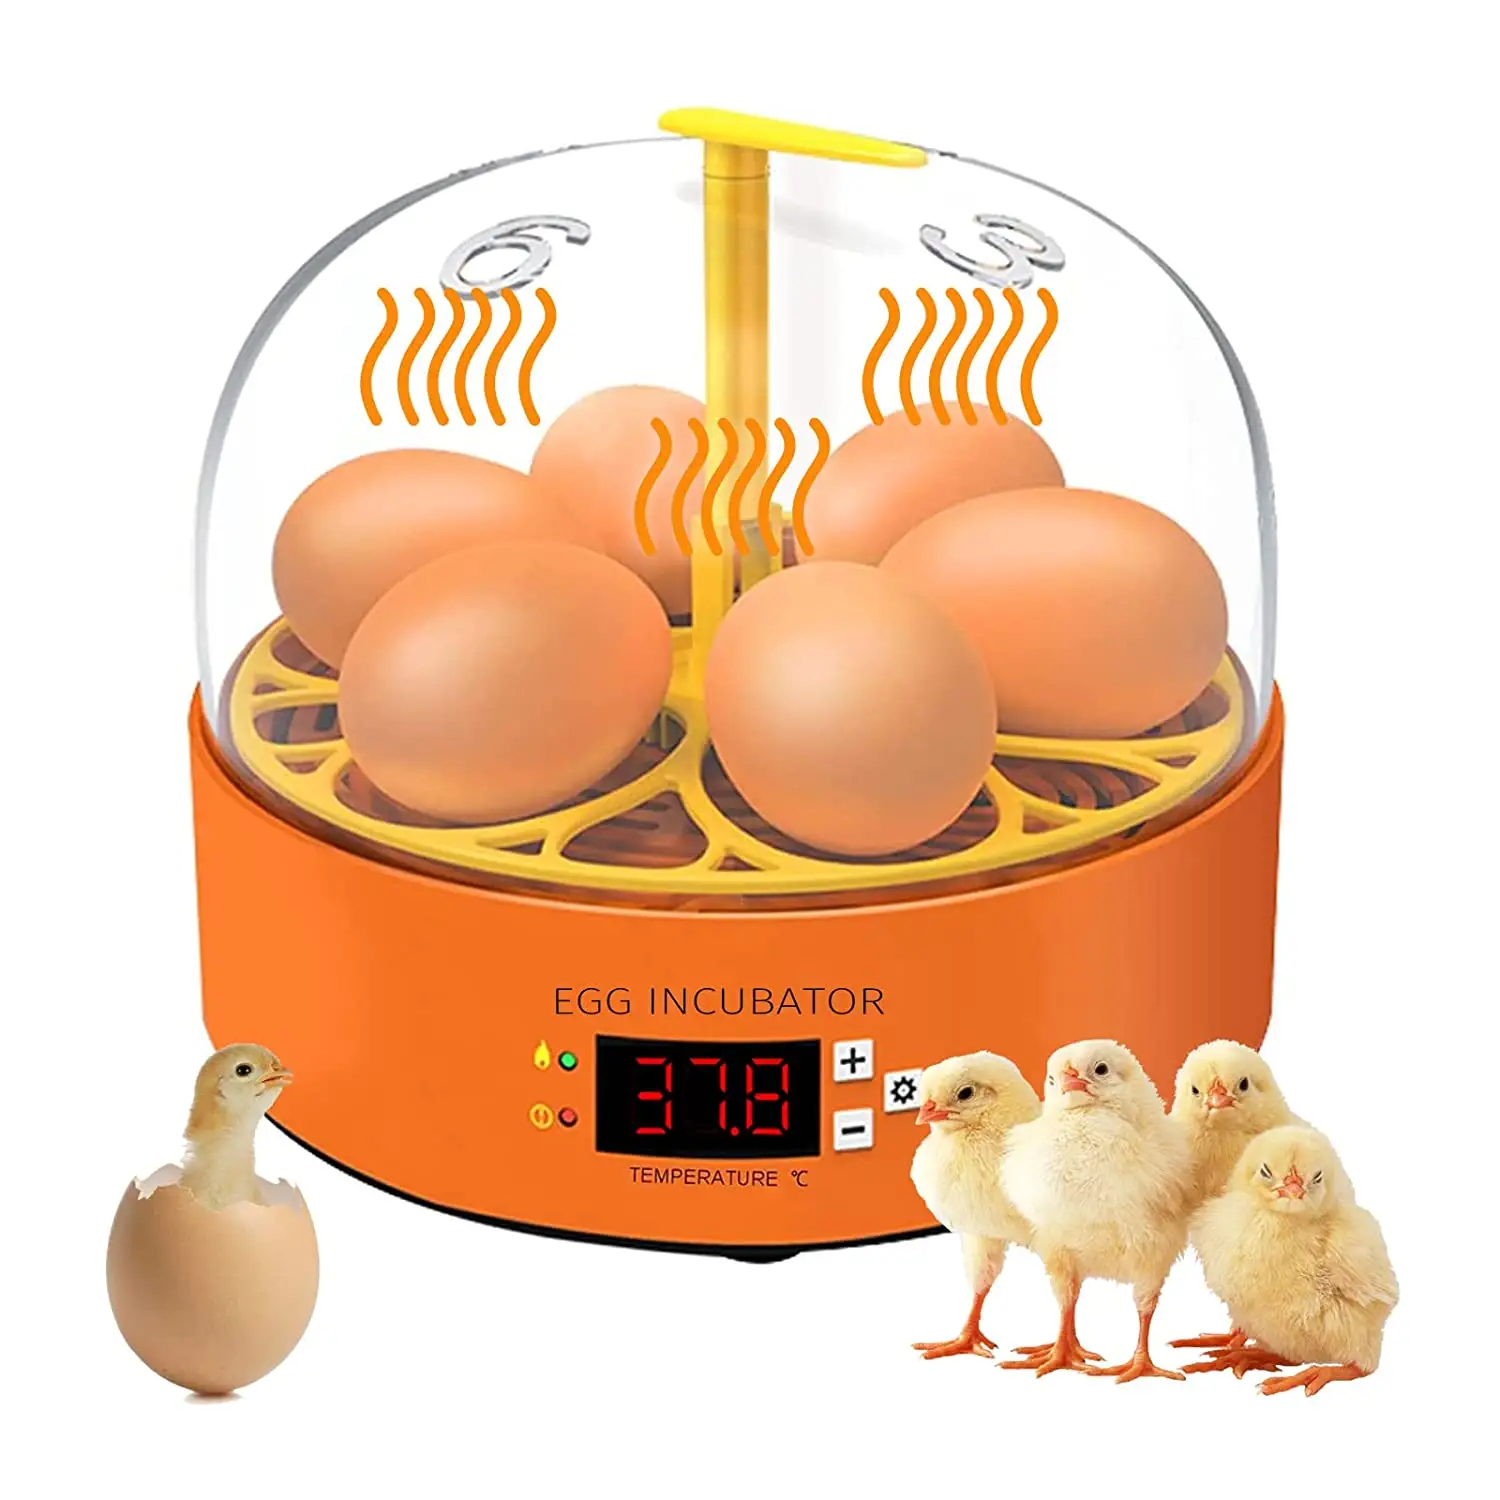 Egg Incubator 6 Eggs Poultry Hatching Machine with Automatic Egg Turning and Temperature Control for Chicken Quail